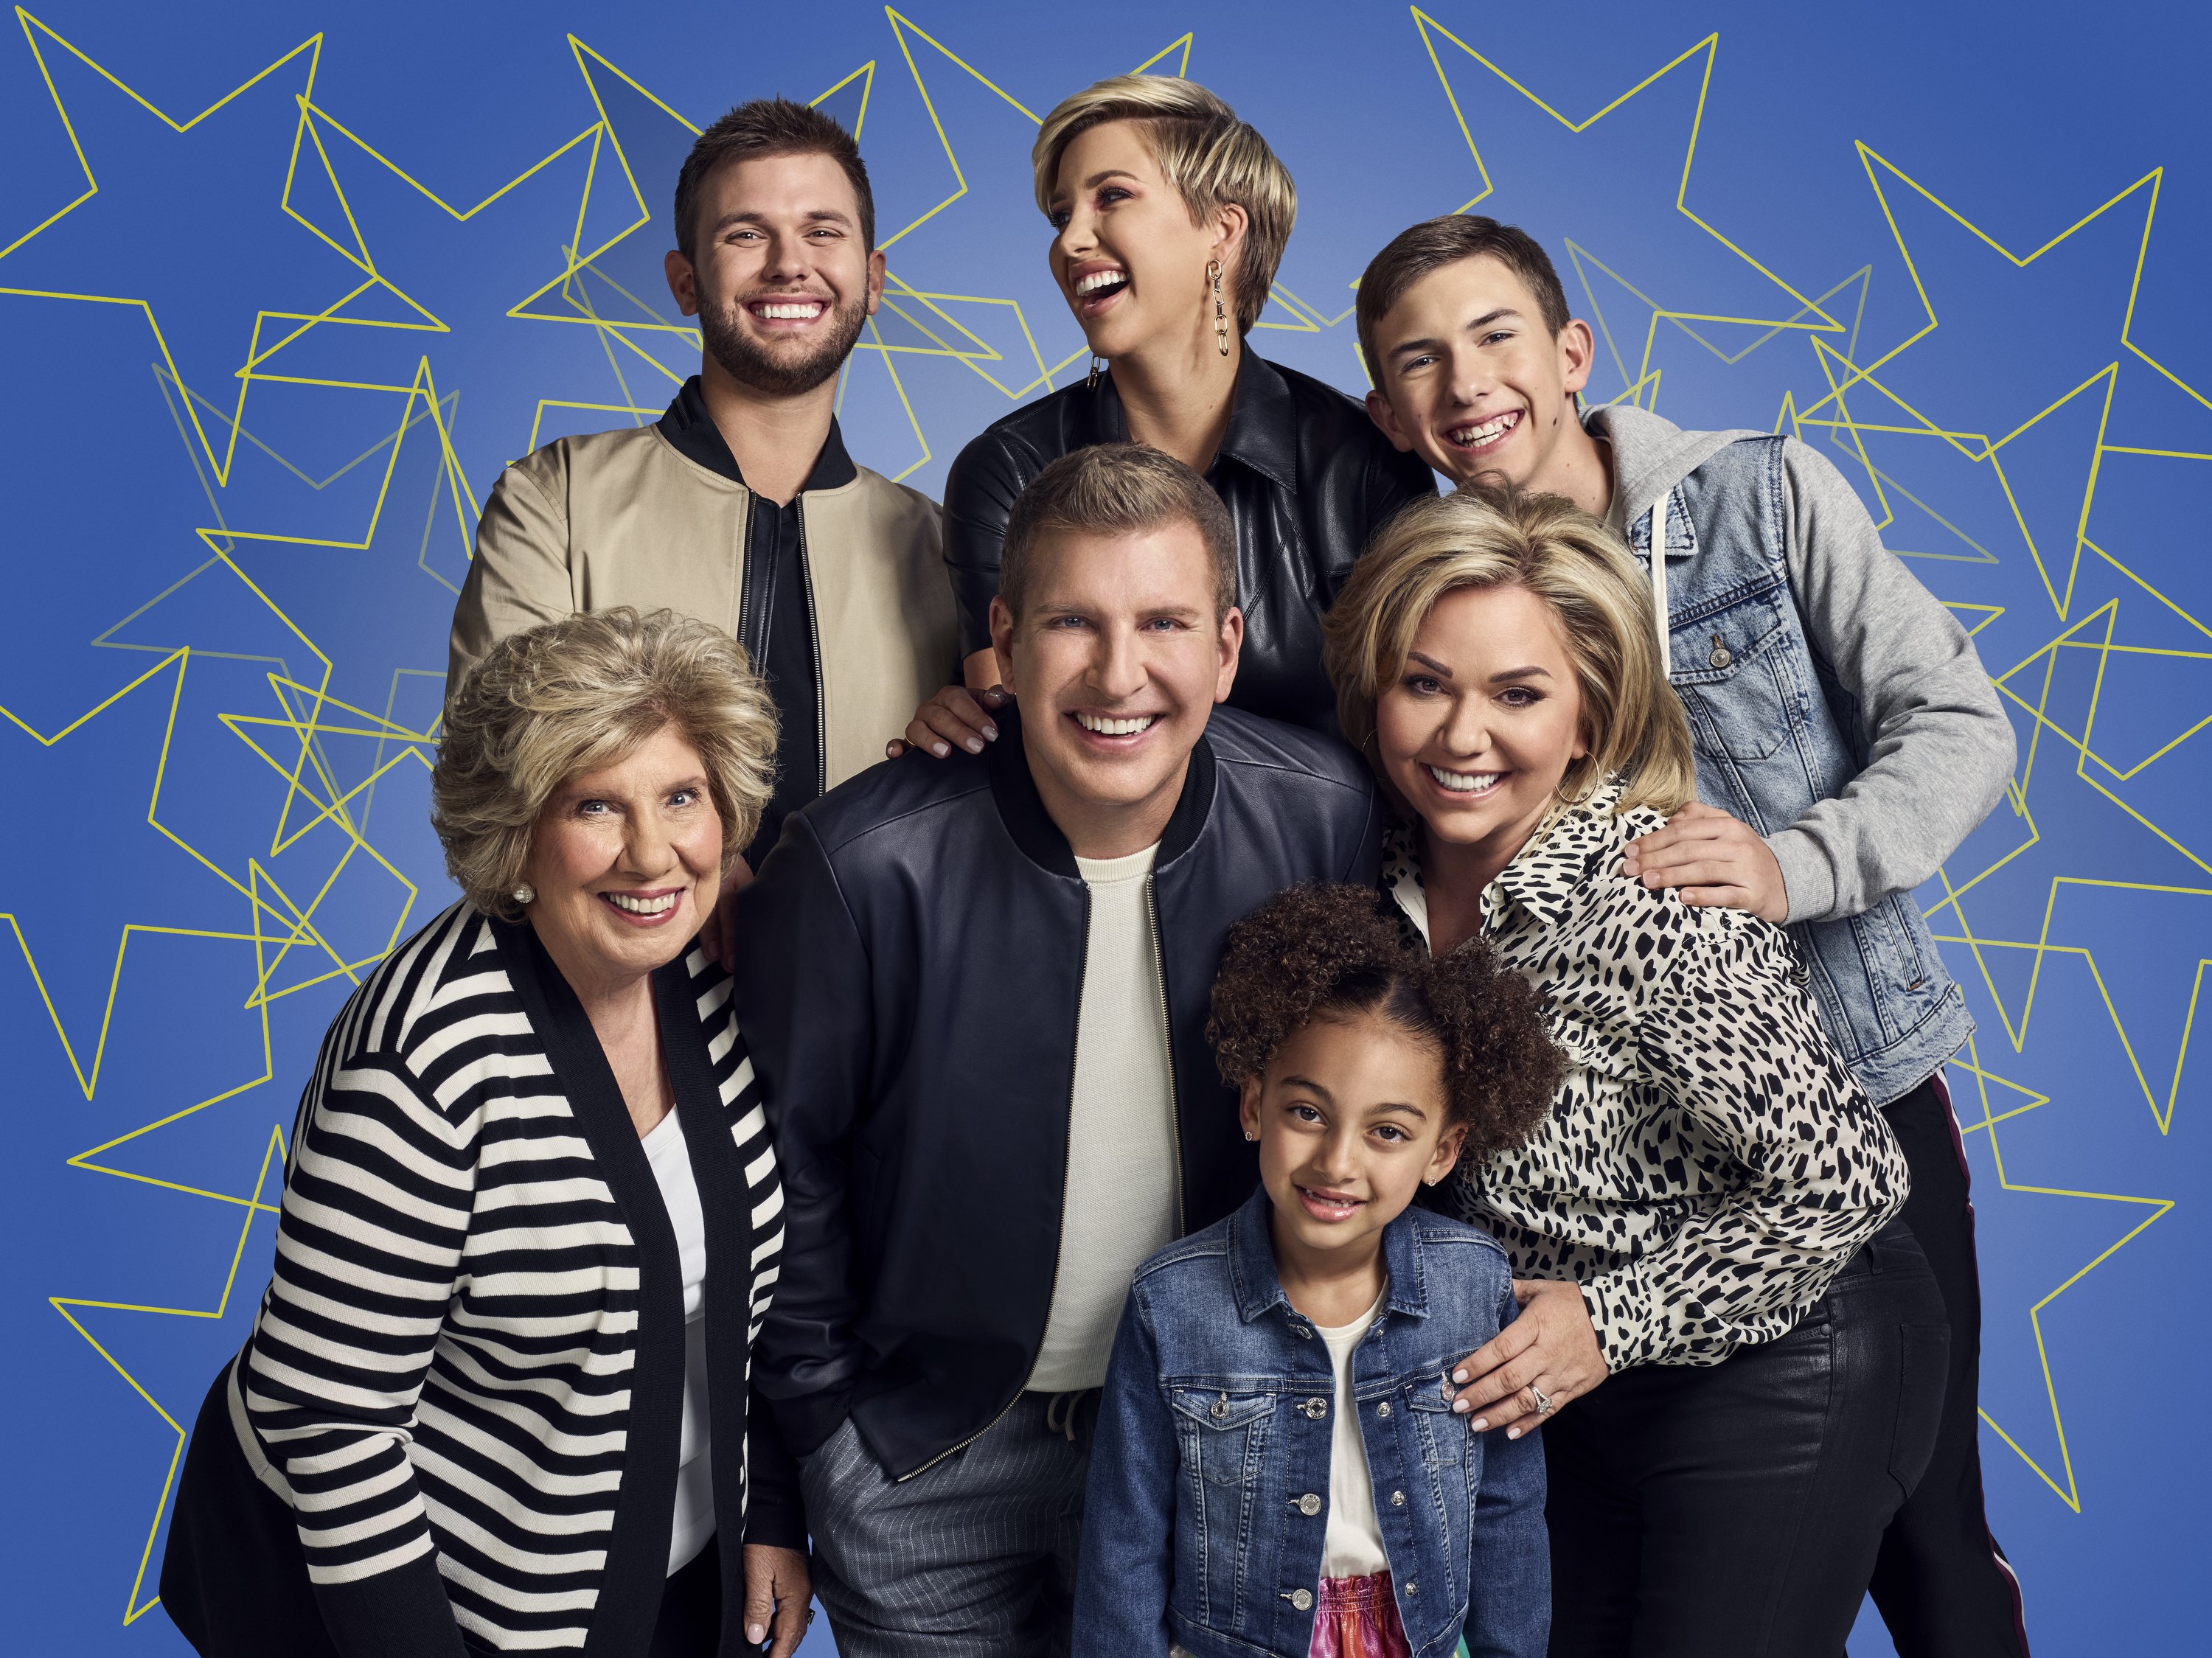 Check Out the Hyperbaric Chamber 'Chrisley Knows Best' Star Todd